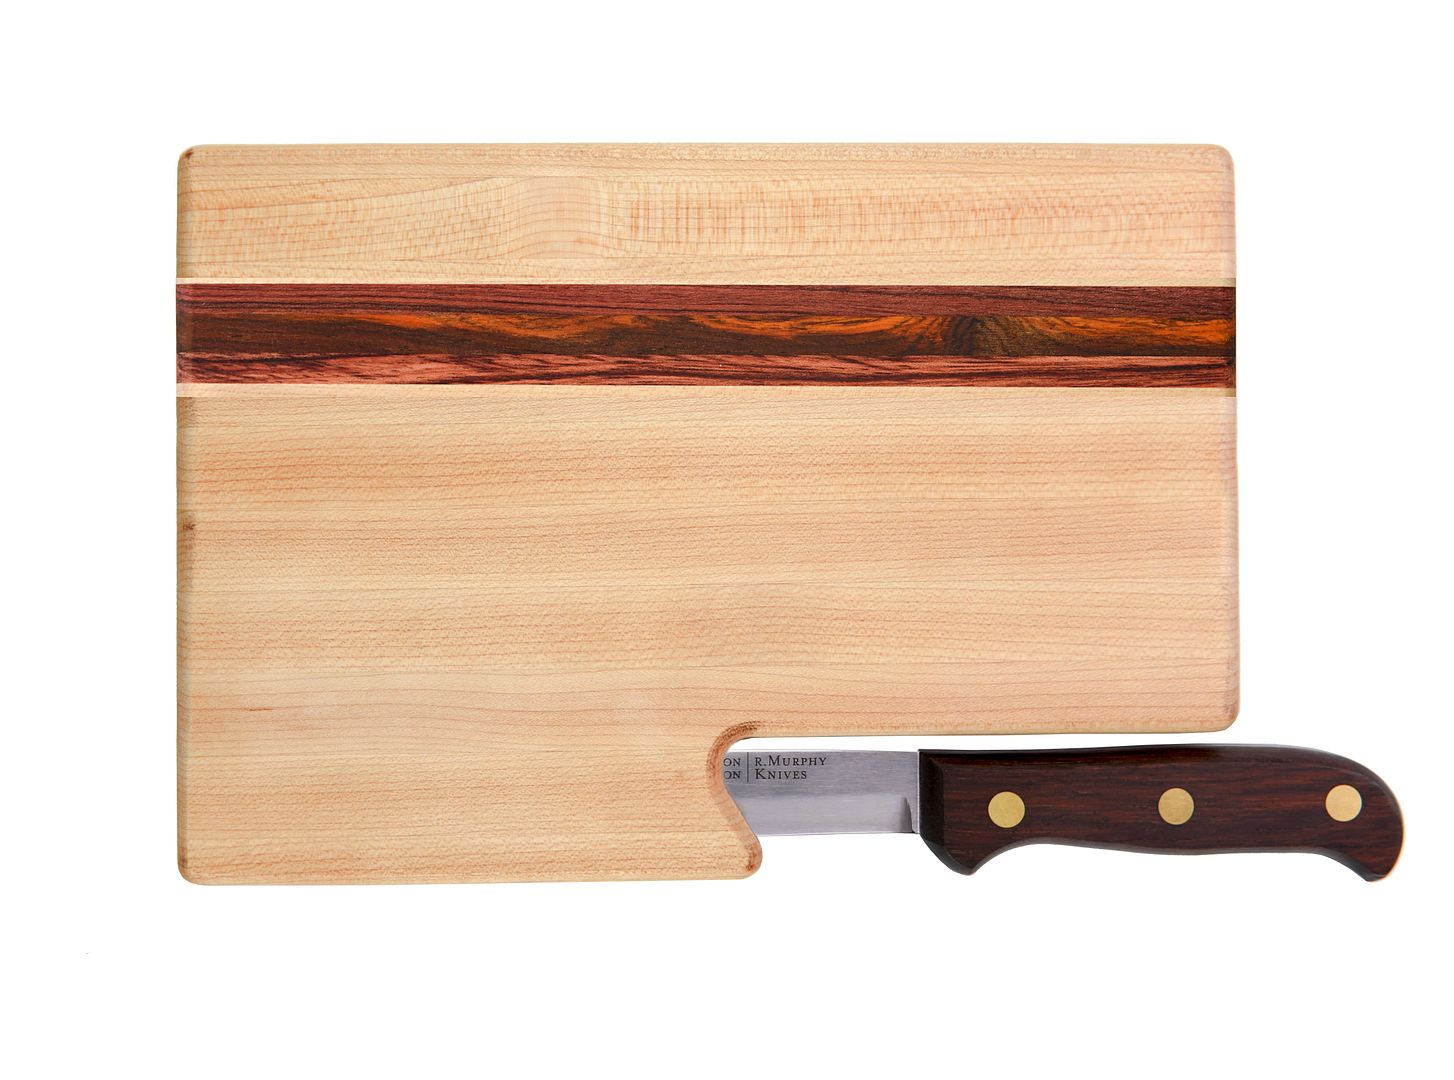 Cool Mom Eats holiday gift guide 2016: Buying for the cook who has everything? A handmade knife or knife set from R. Murphy is the ticket.